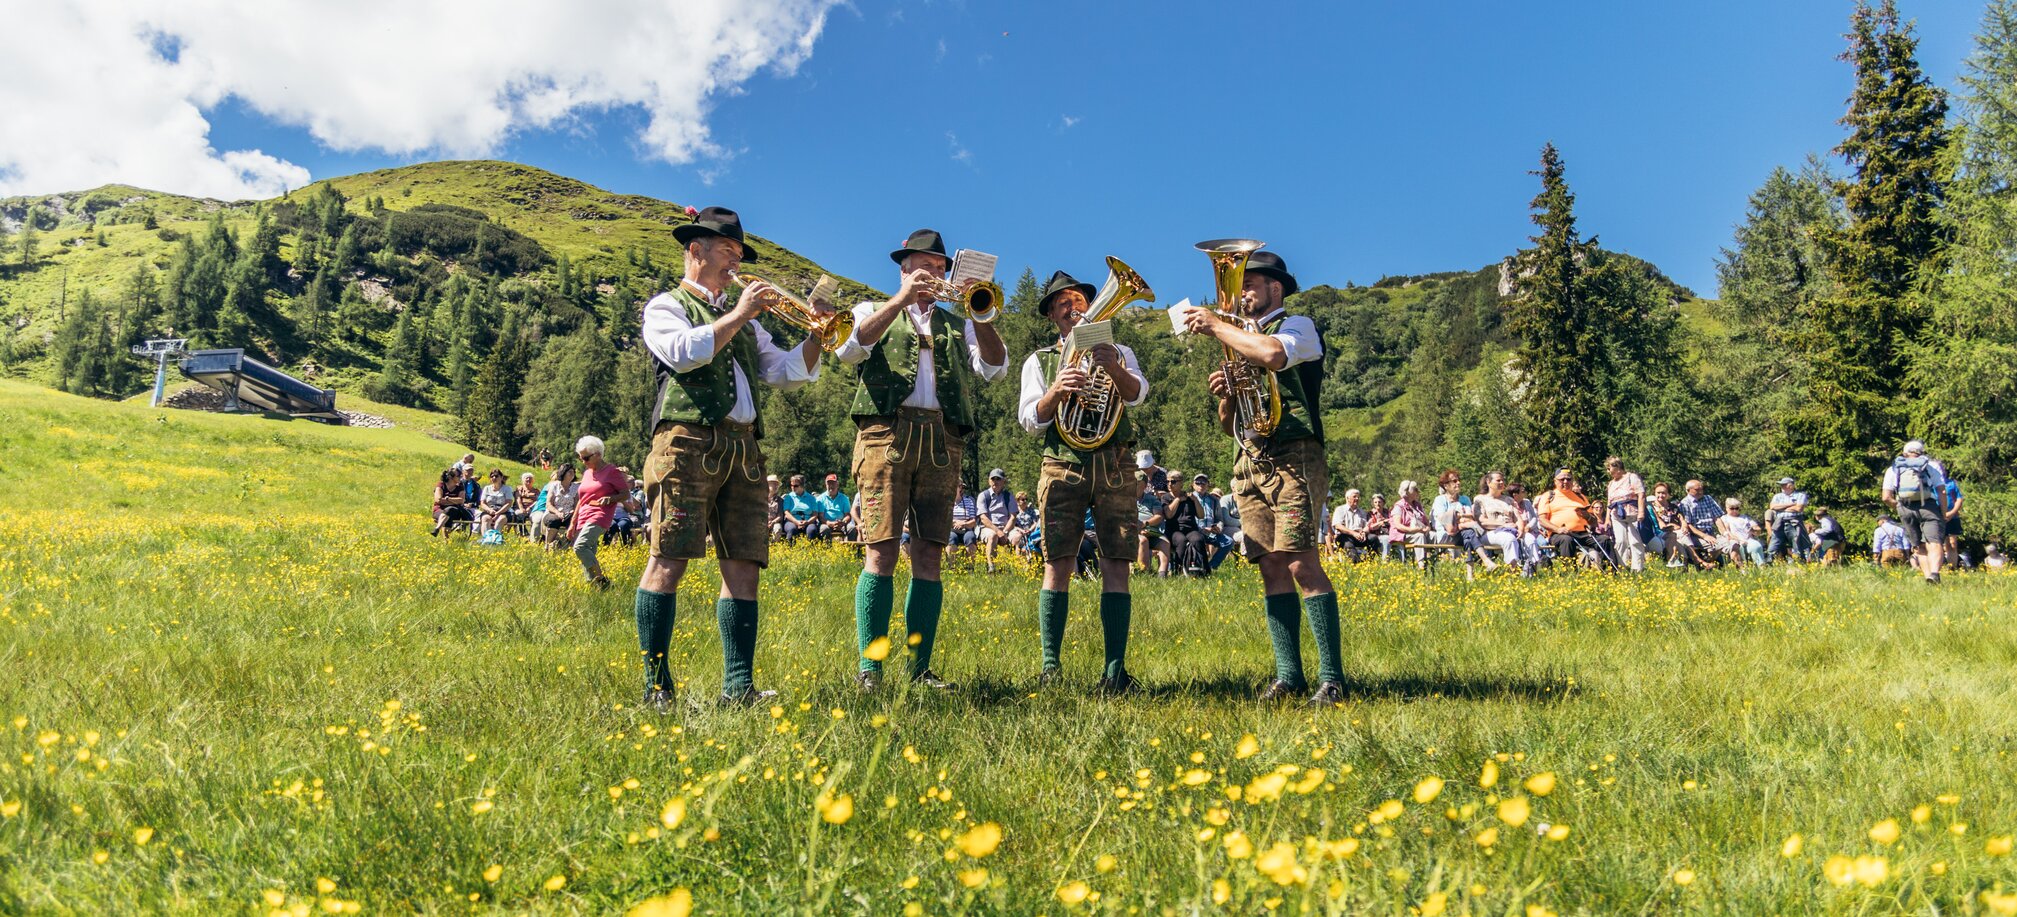 4 musicians are standing on a meadow playing brass instruments and many people are sitting in the background | © Reiteralm